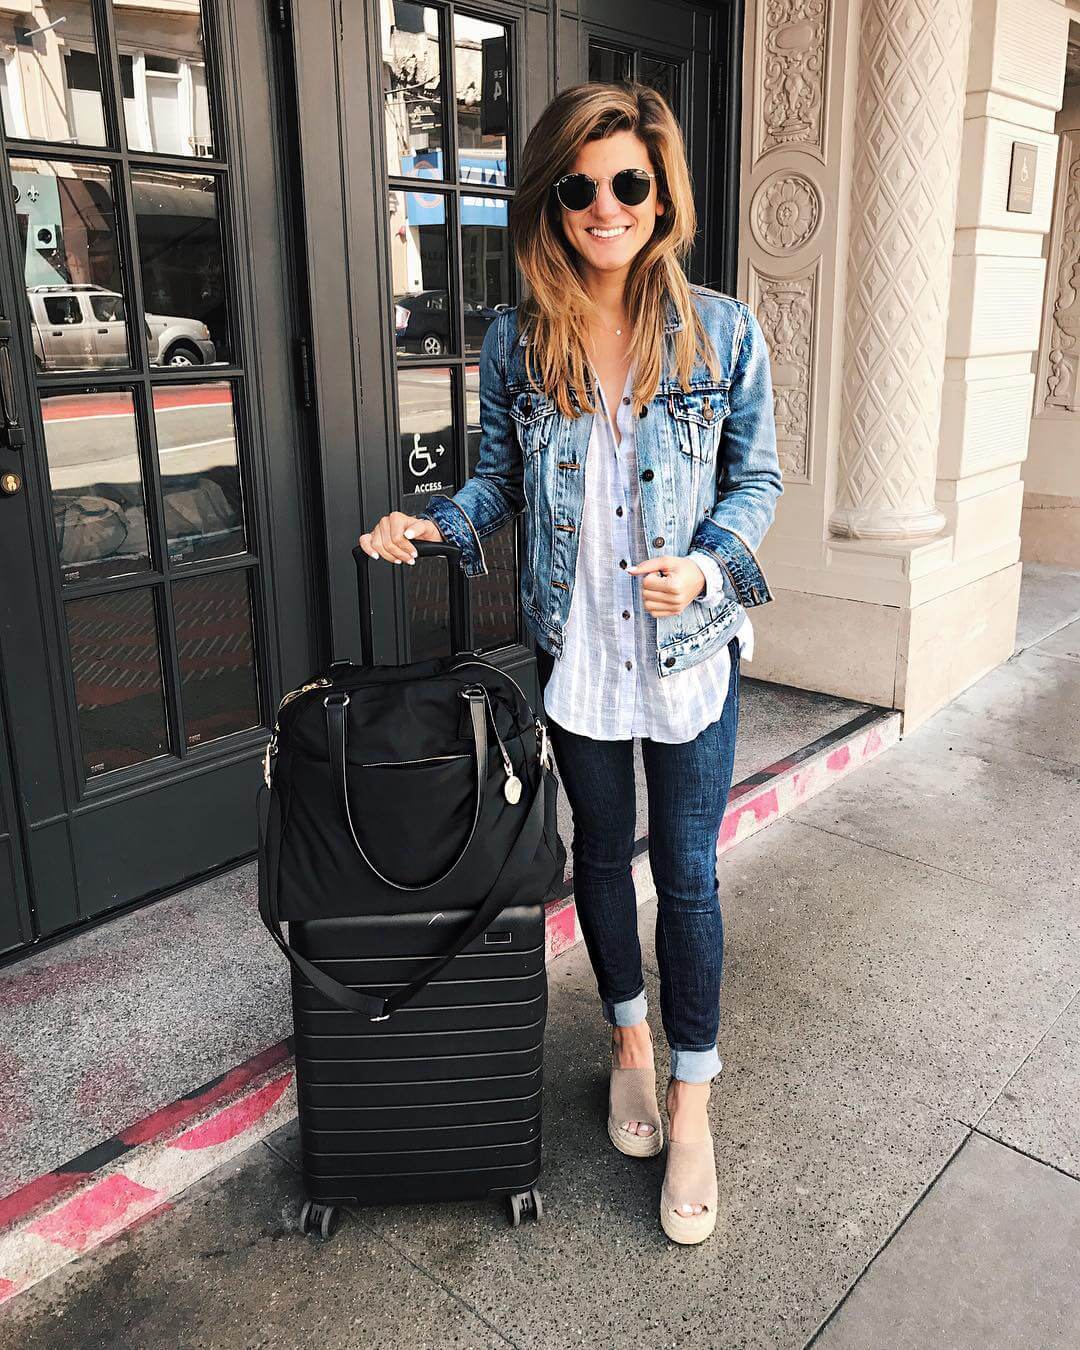 landed in san francisco wearing denim on denim outfit with denim jacket, jeans, and button up 